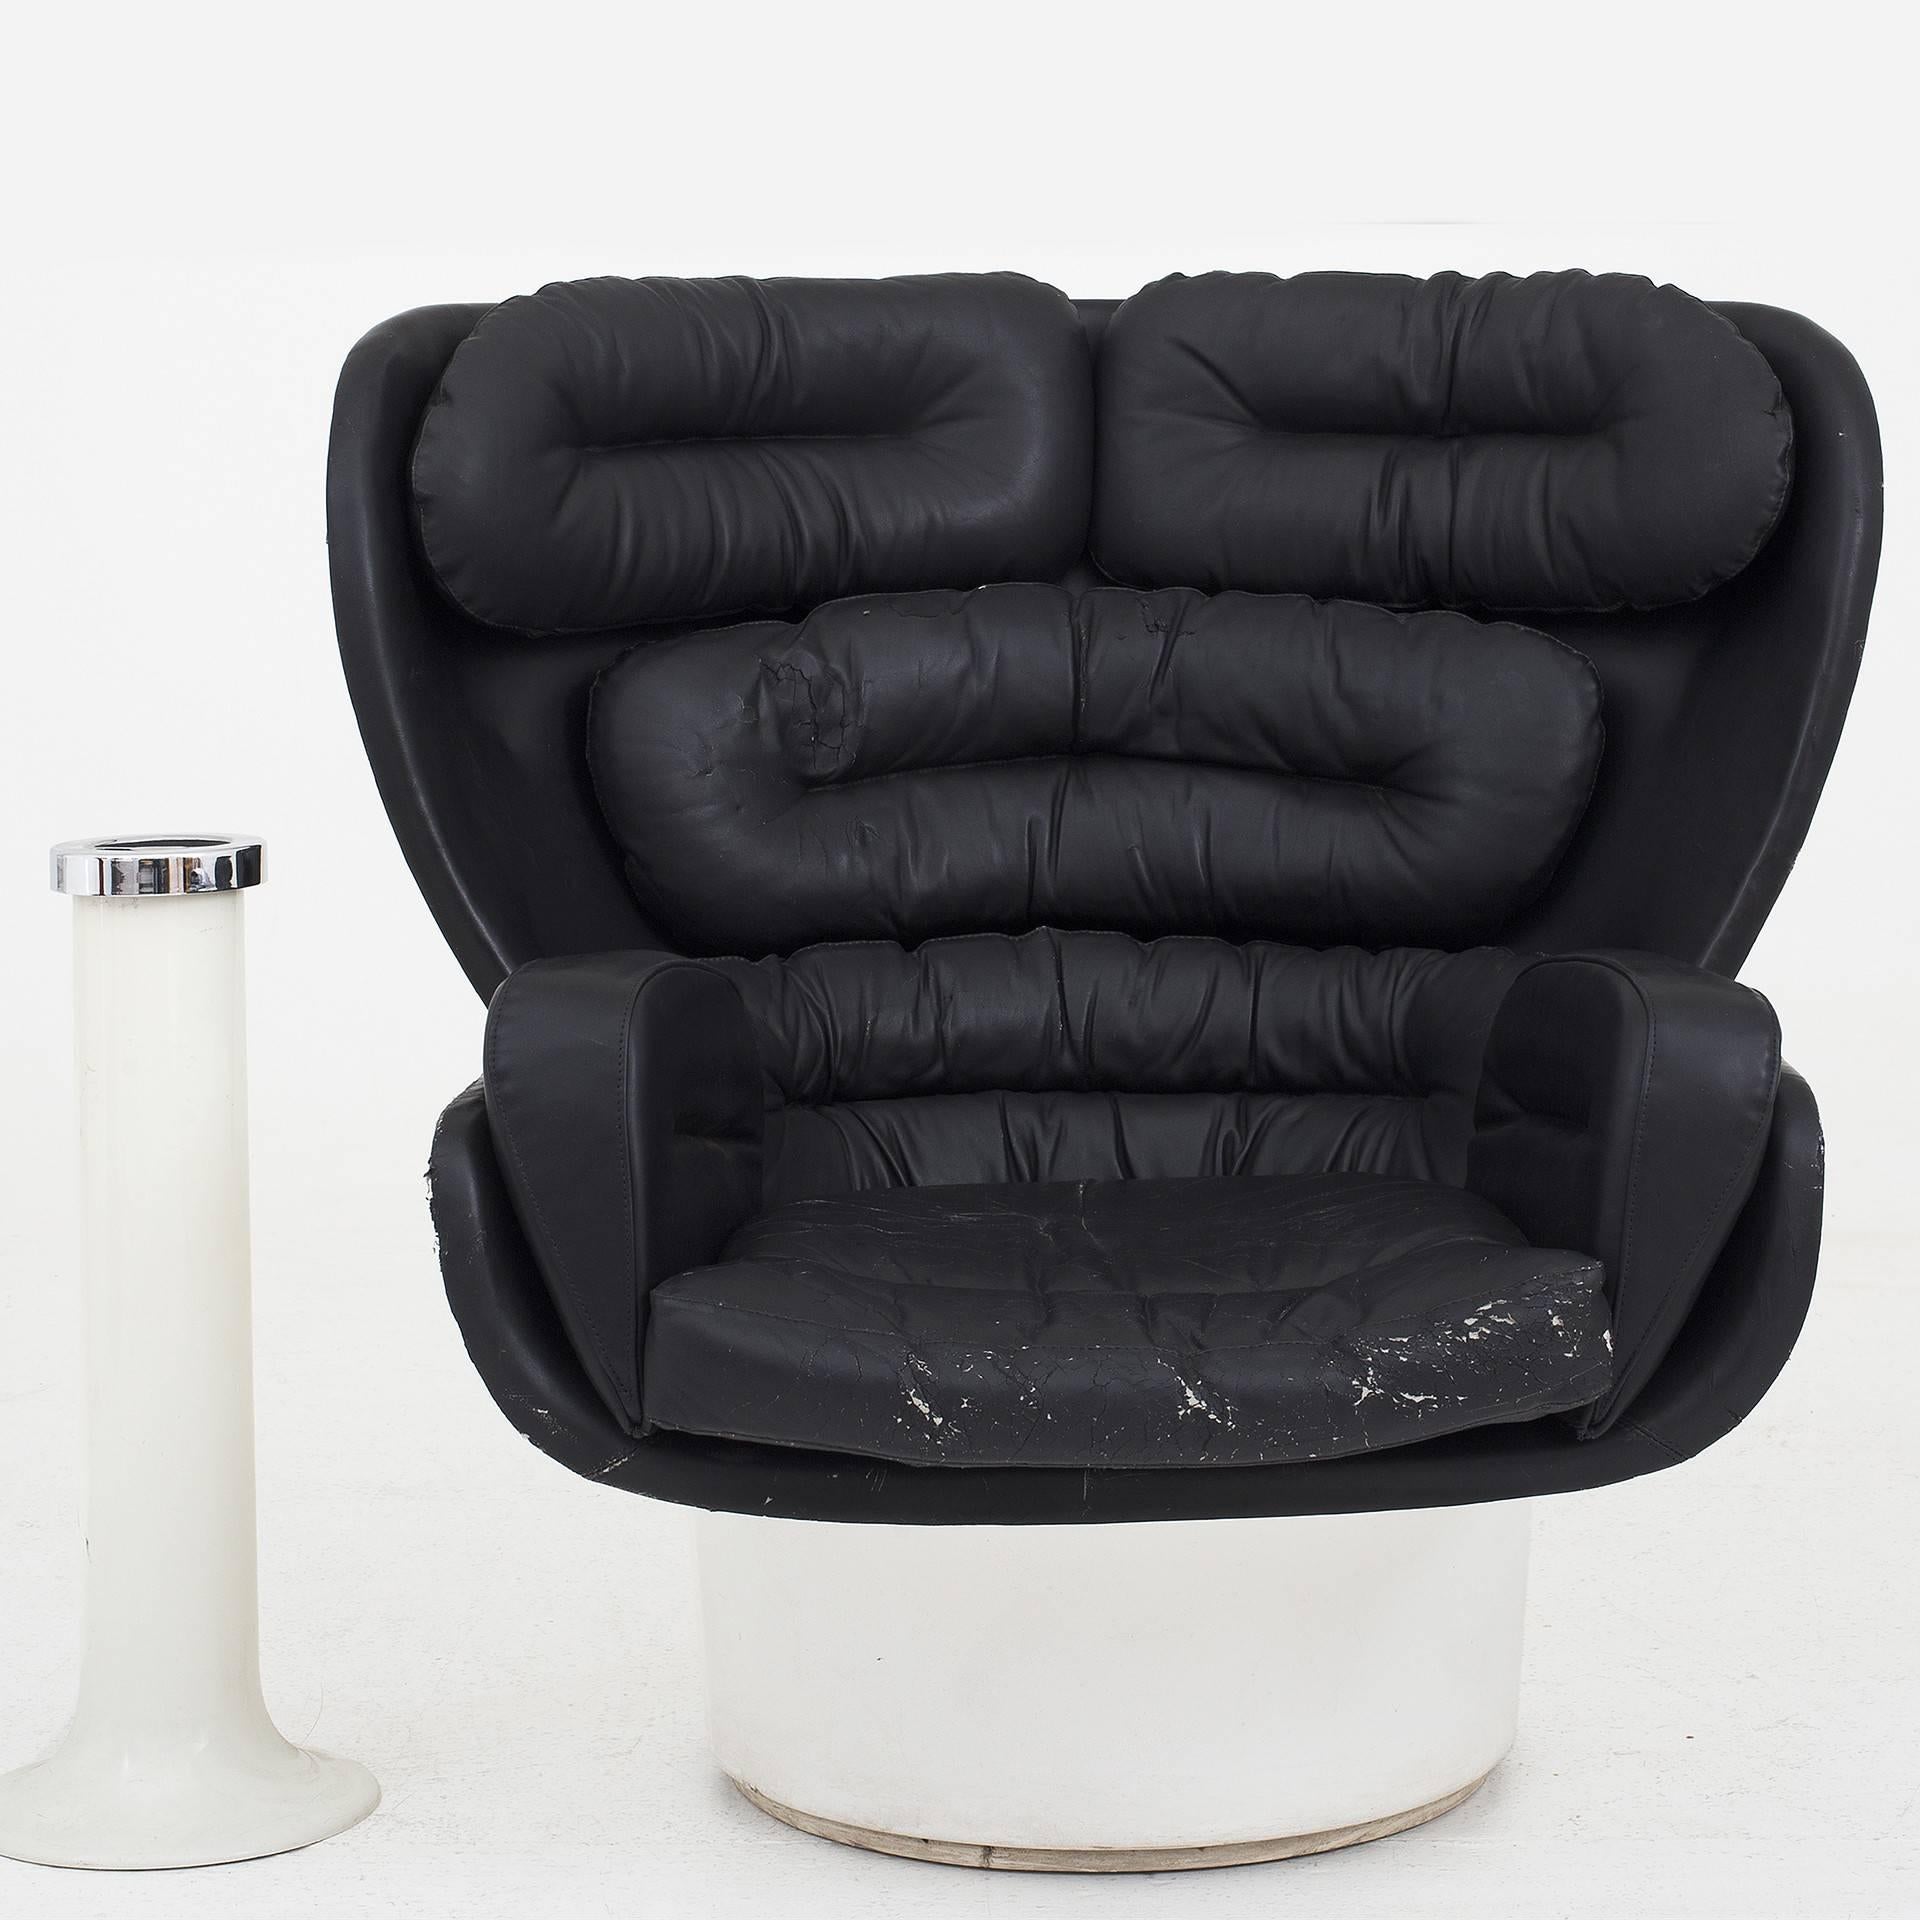 Lounge chair with swivel base and black leather. Maker Stilnovo.